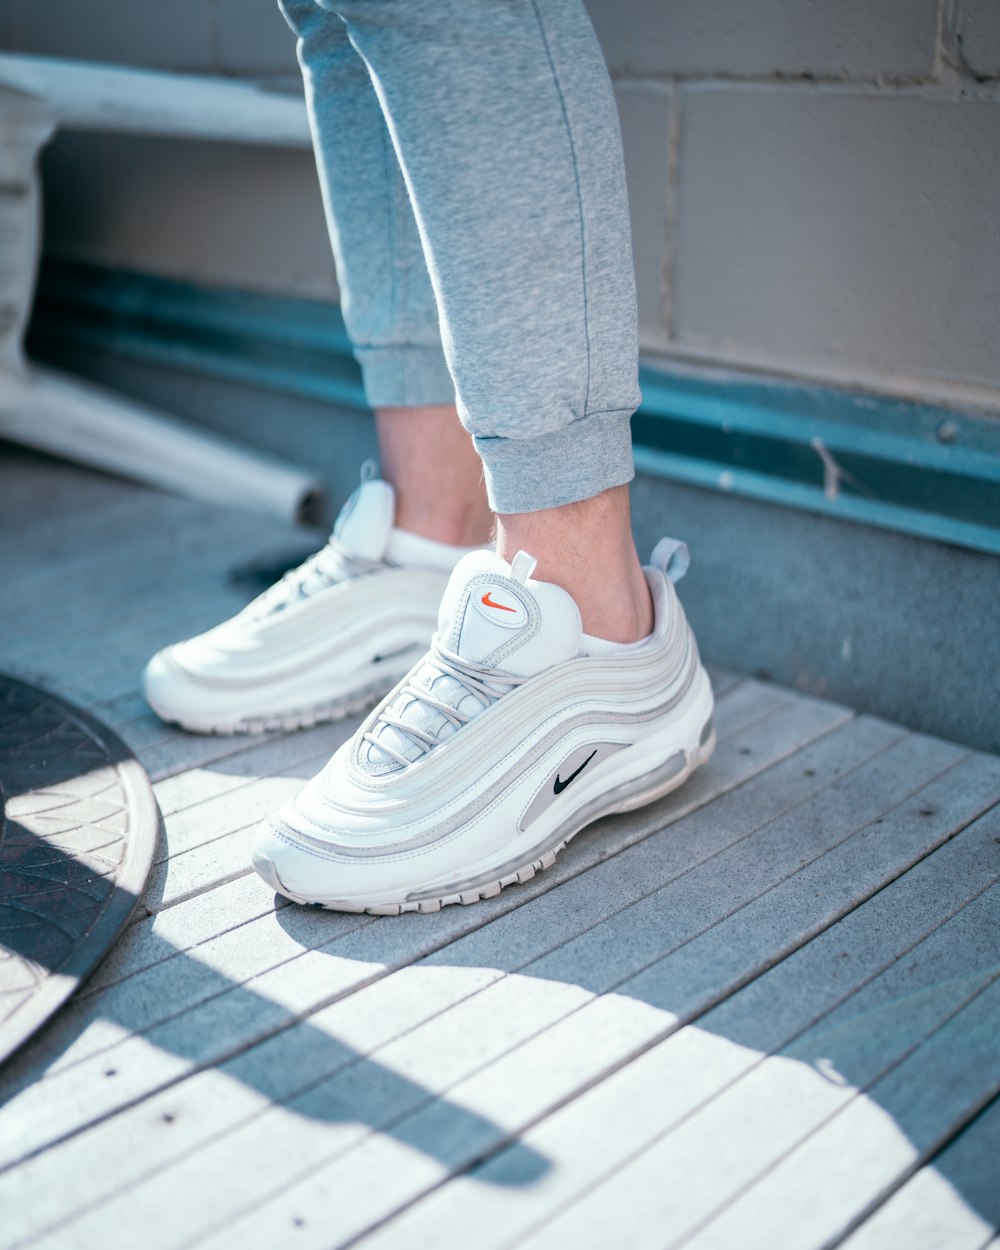 person in gray sweatpants wearing white nike sneakers photo – Free Chicago  Image on Unsplash